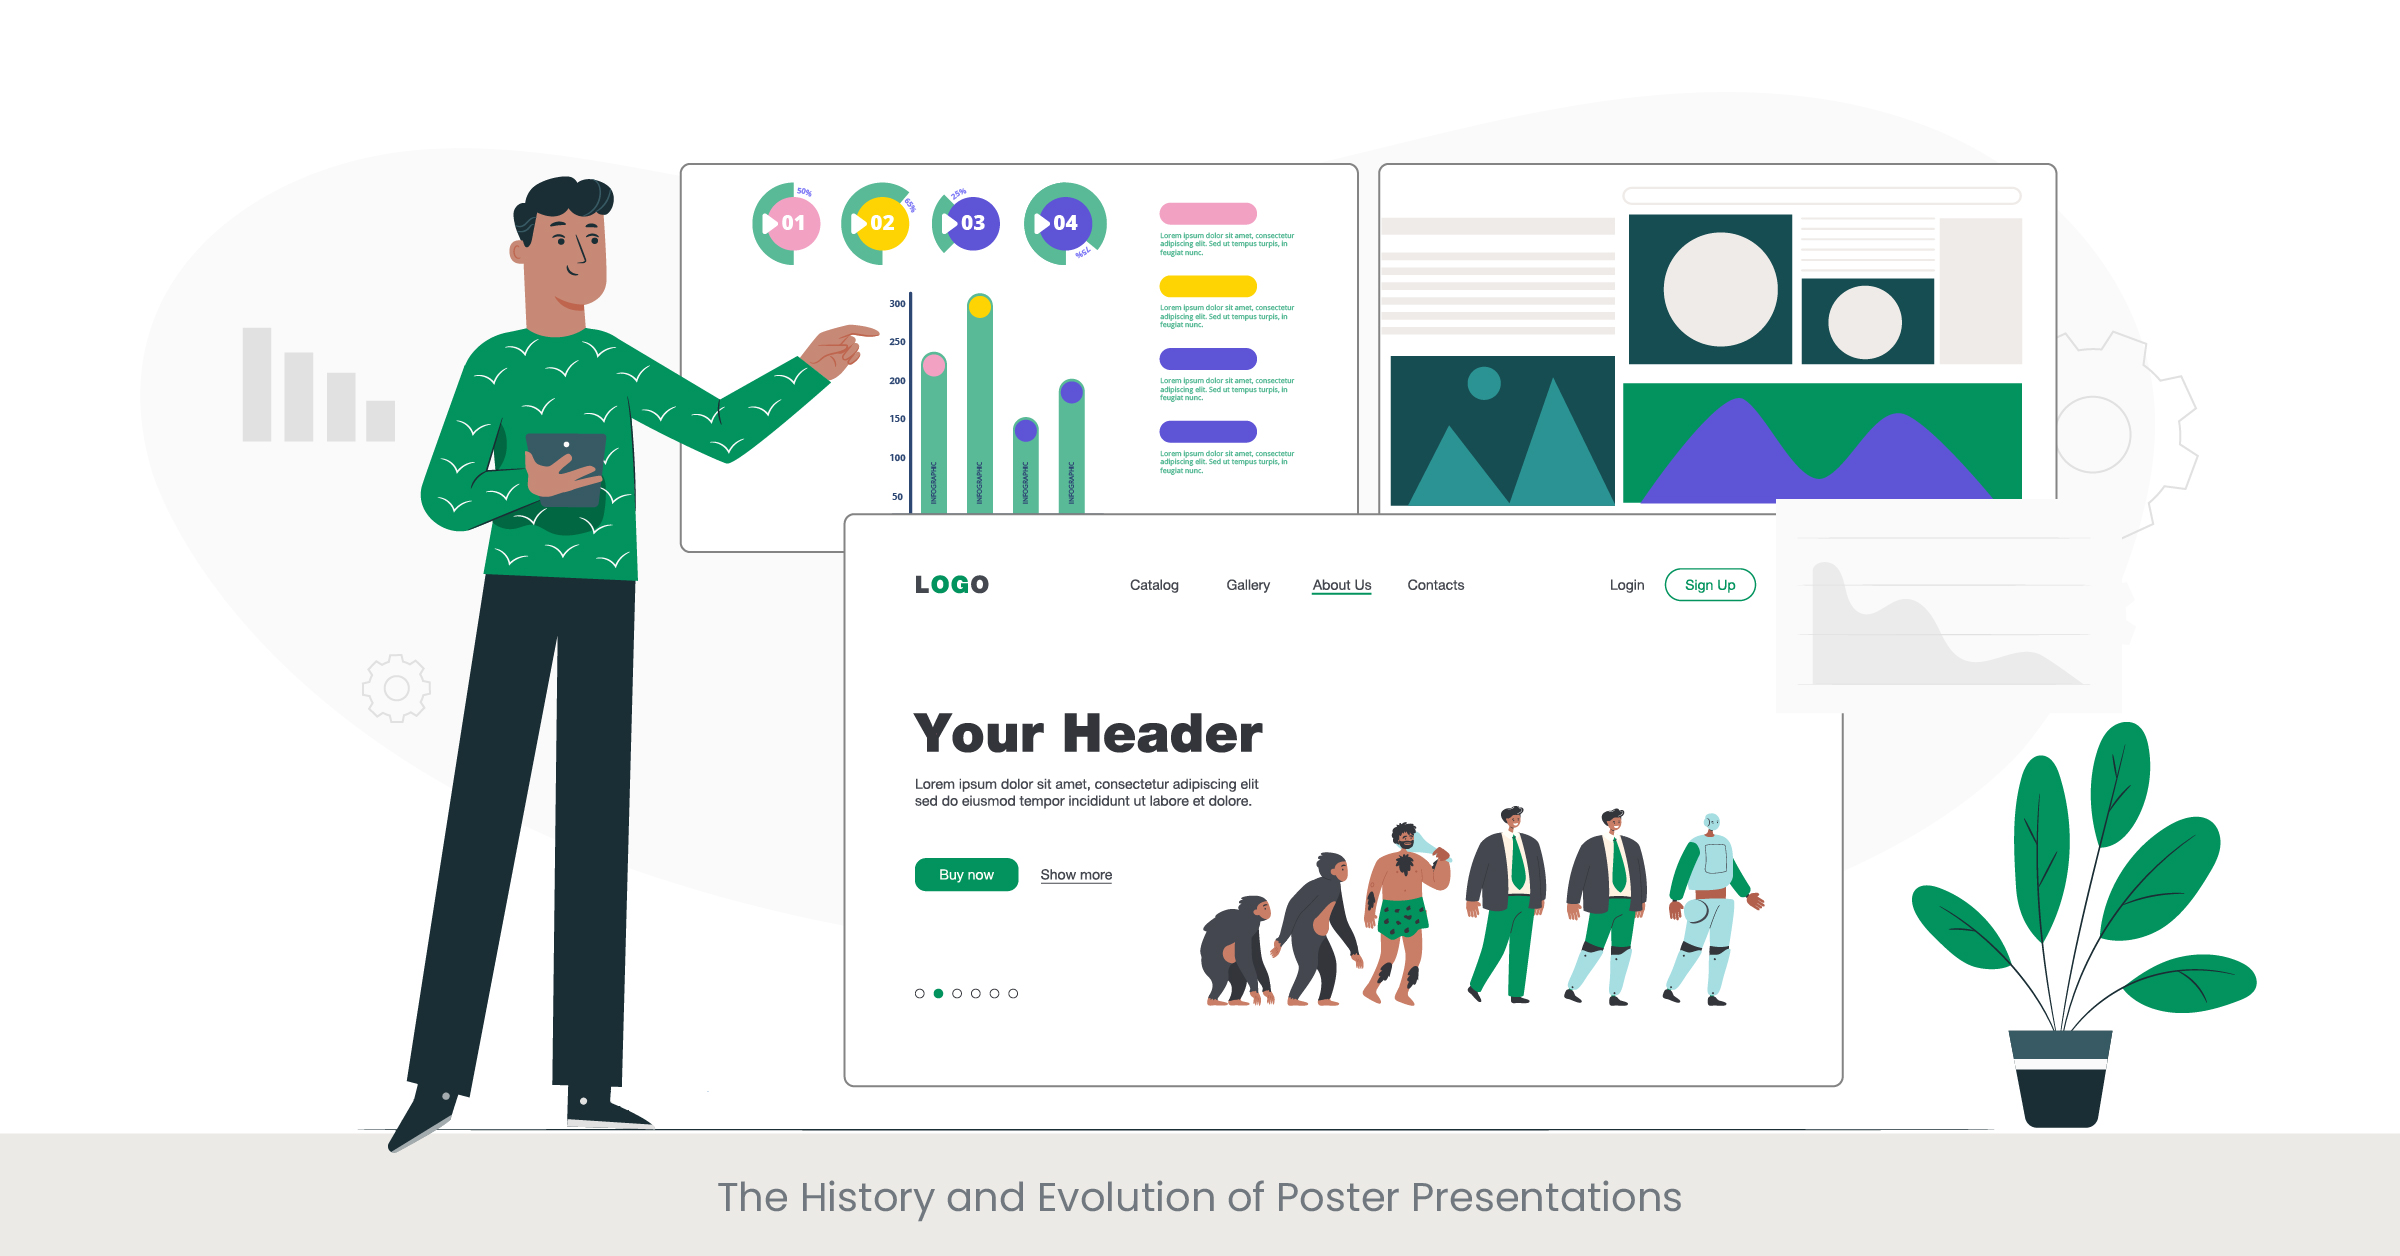 The History and Evolution of Poster Presentations